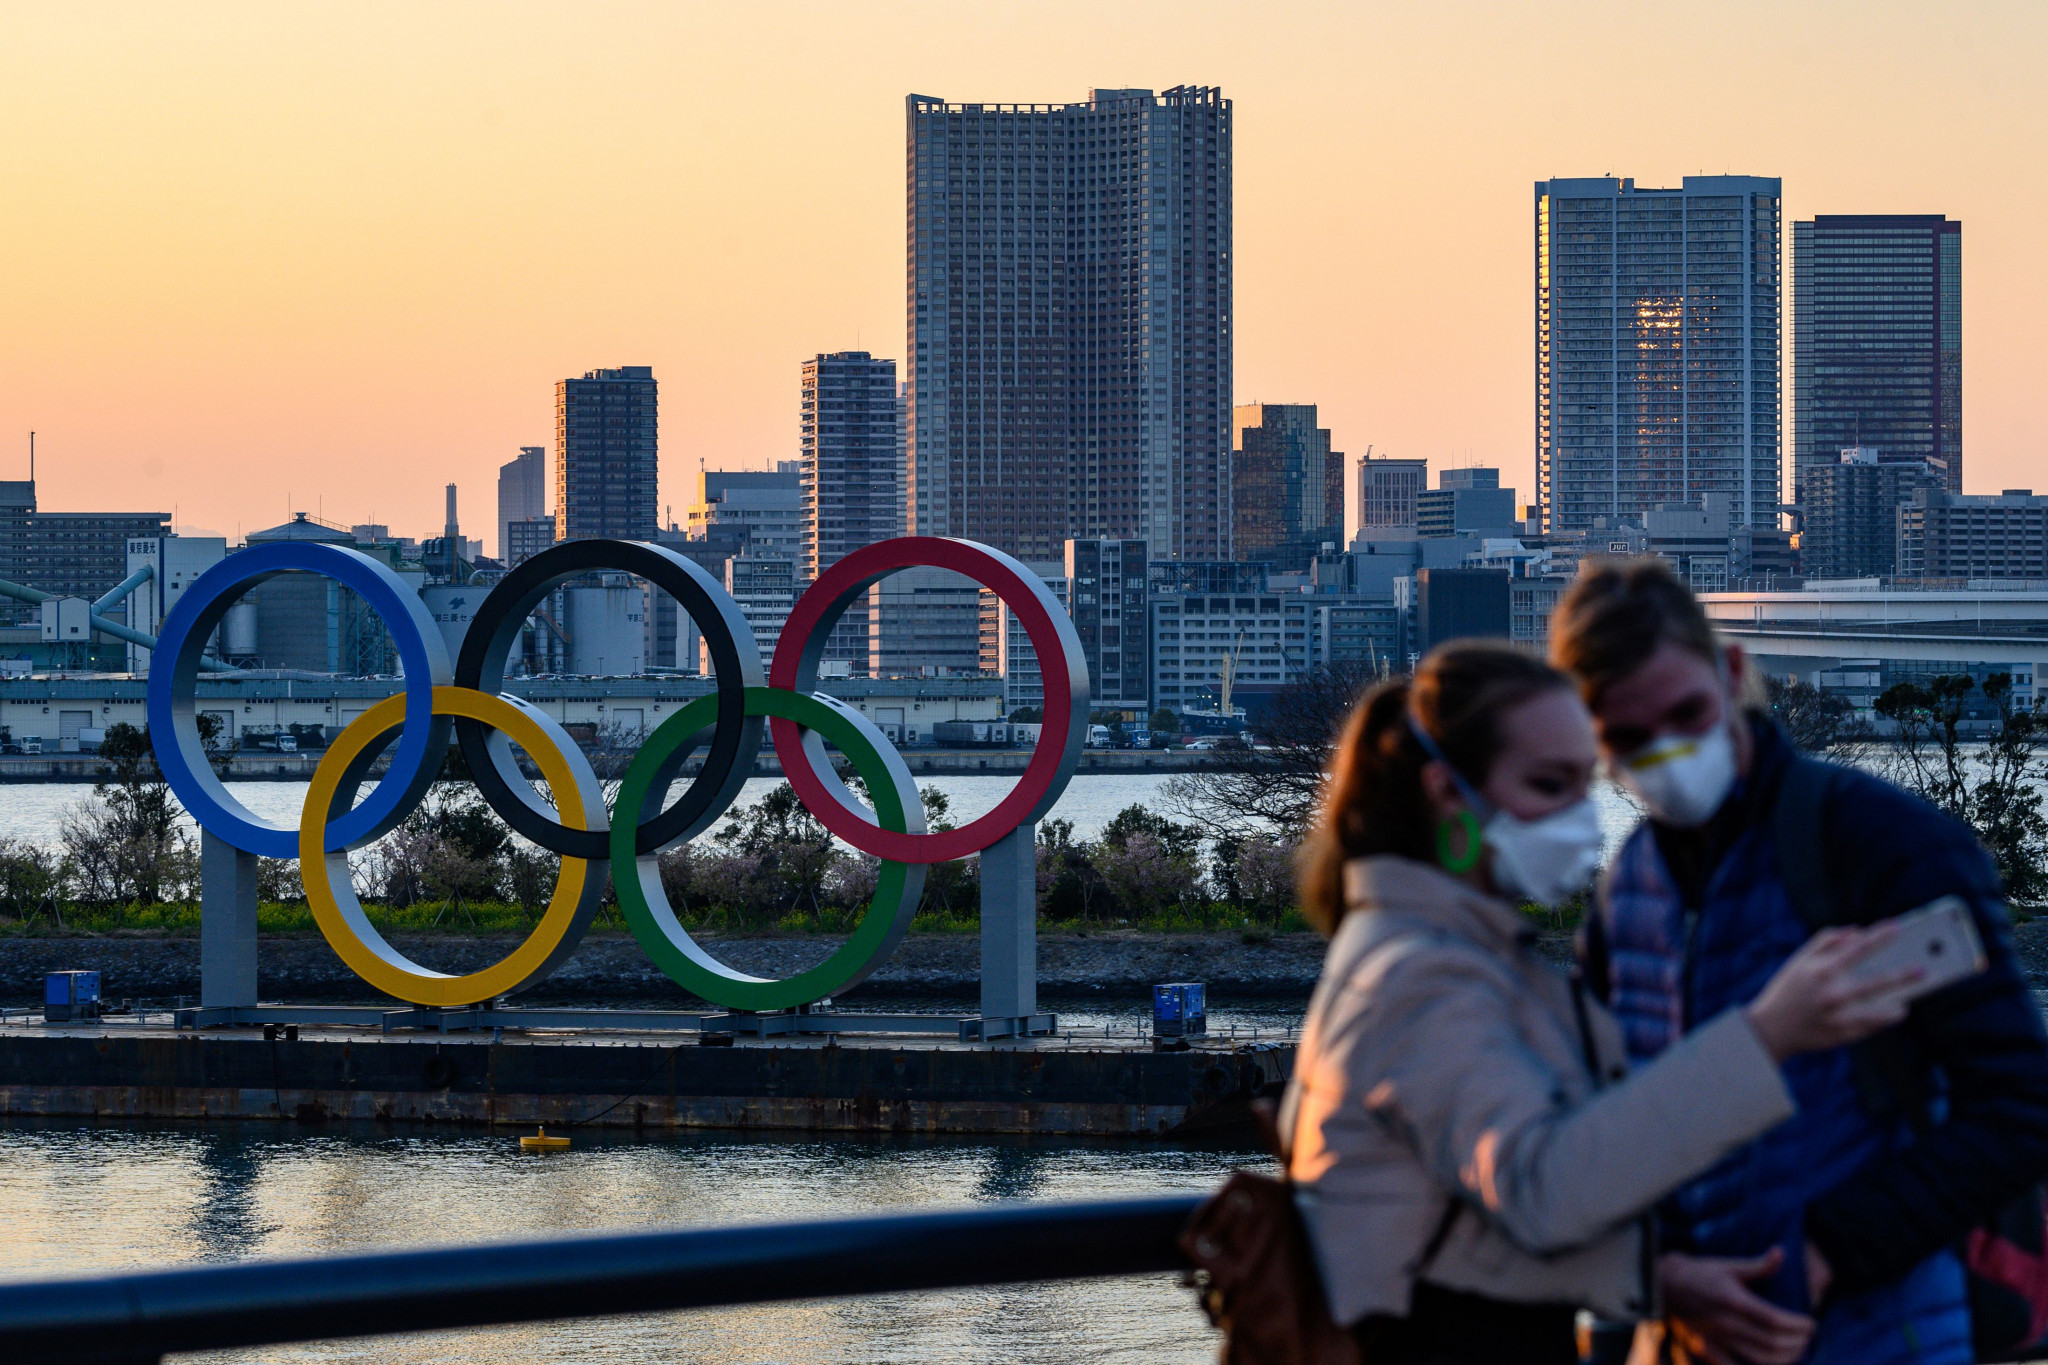 The coronavirus crisis has led to fears that the Tokyo 2020 Olympic and Paralympic Games may be cancelled ©Getty Images